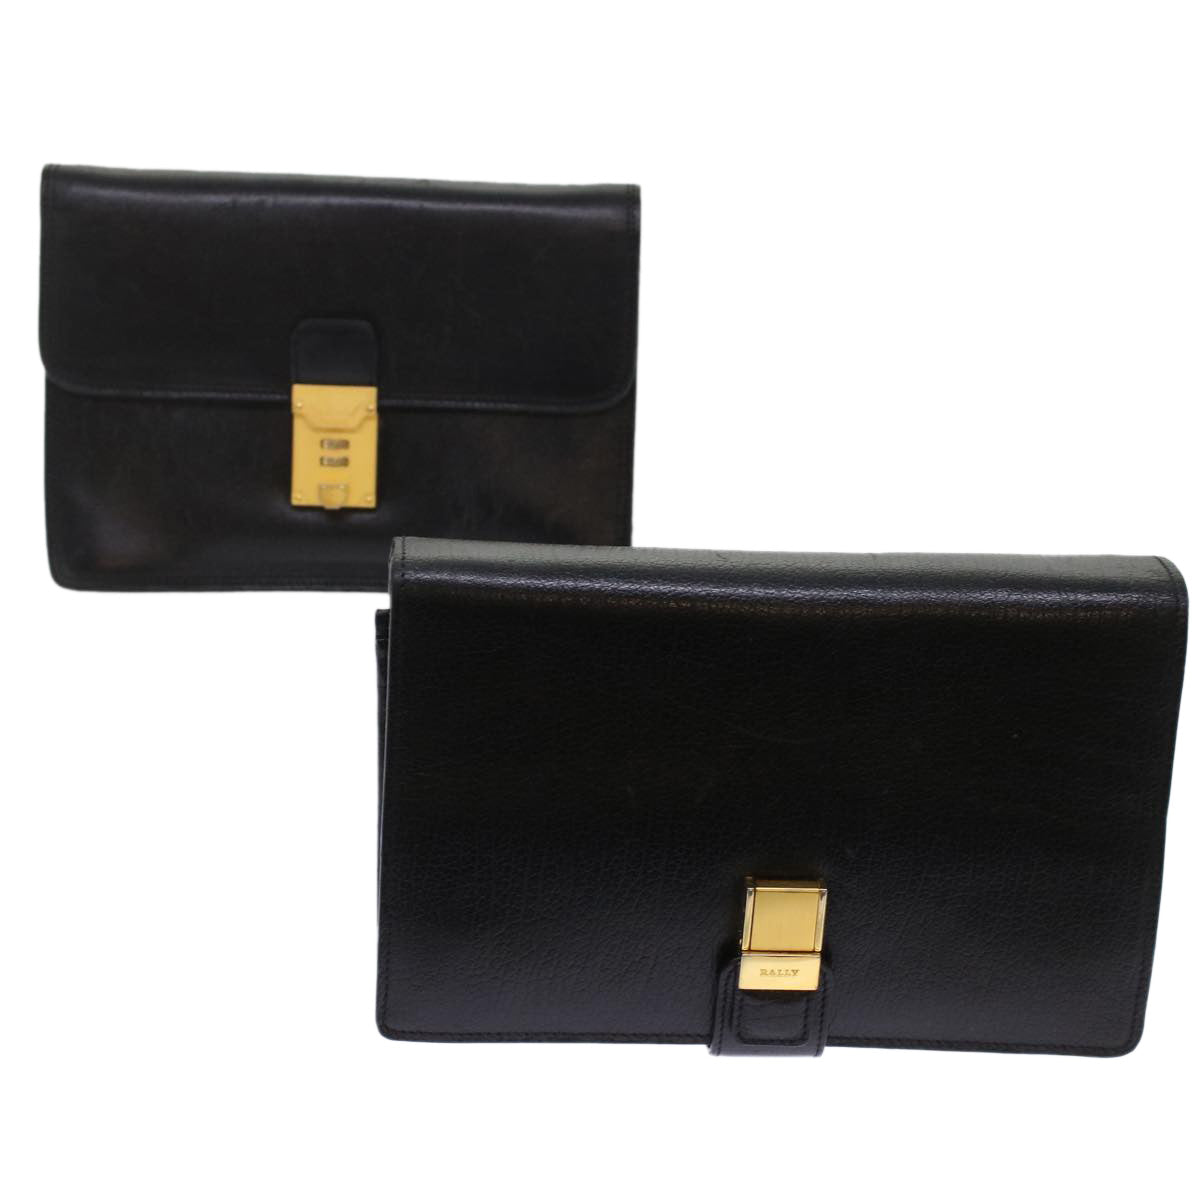 BALLY Clutch Bag Leather 2Set Black Auth bs6963